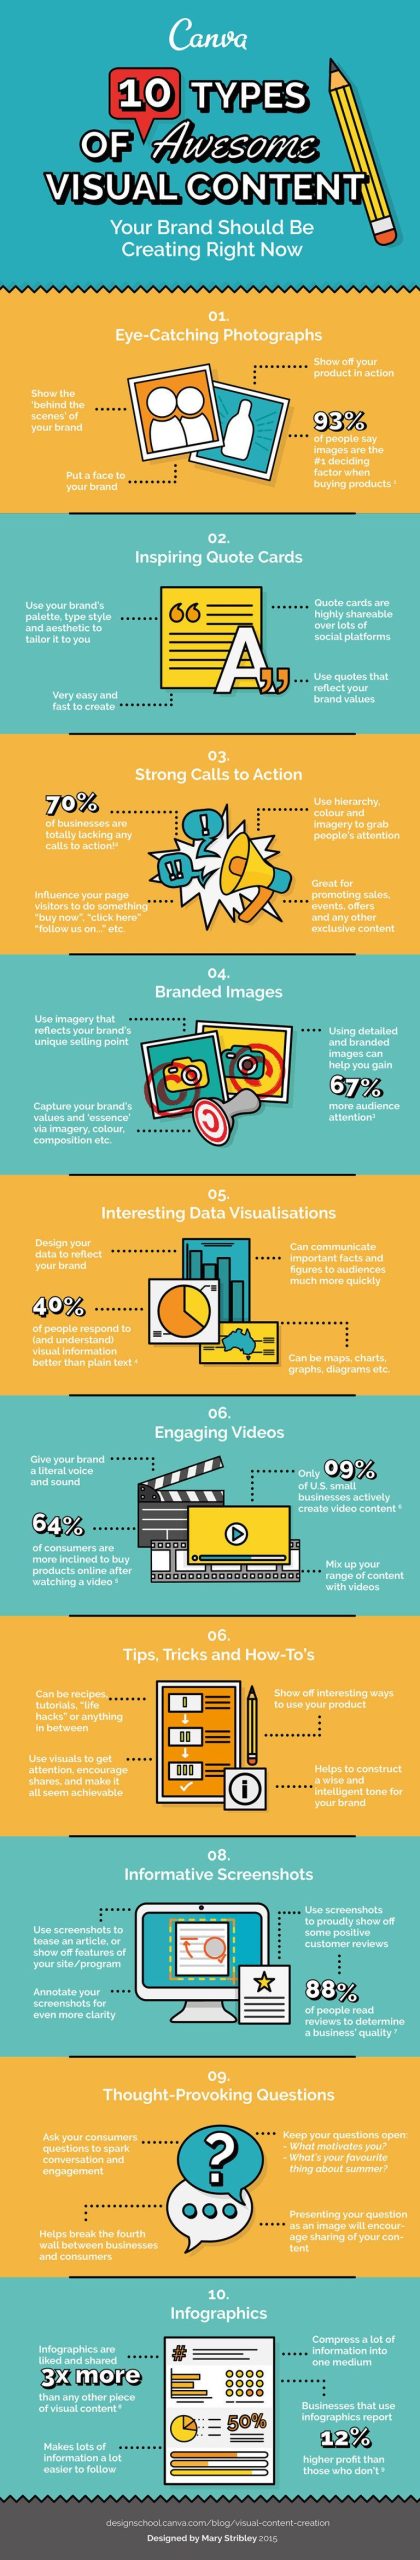 10 Types Of Awesome Visual Content Your Brand Should Be Creating Right Now [Infographic